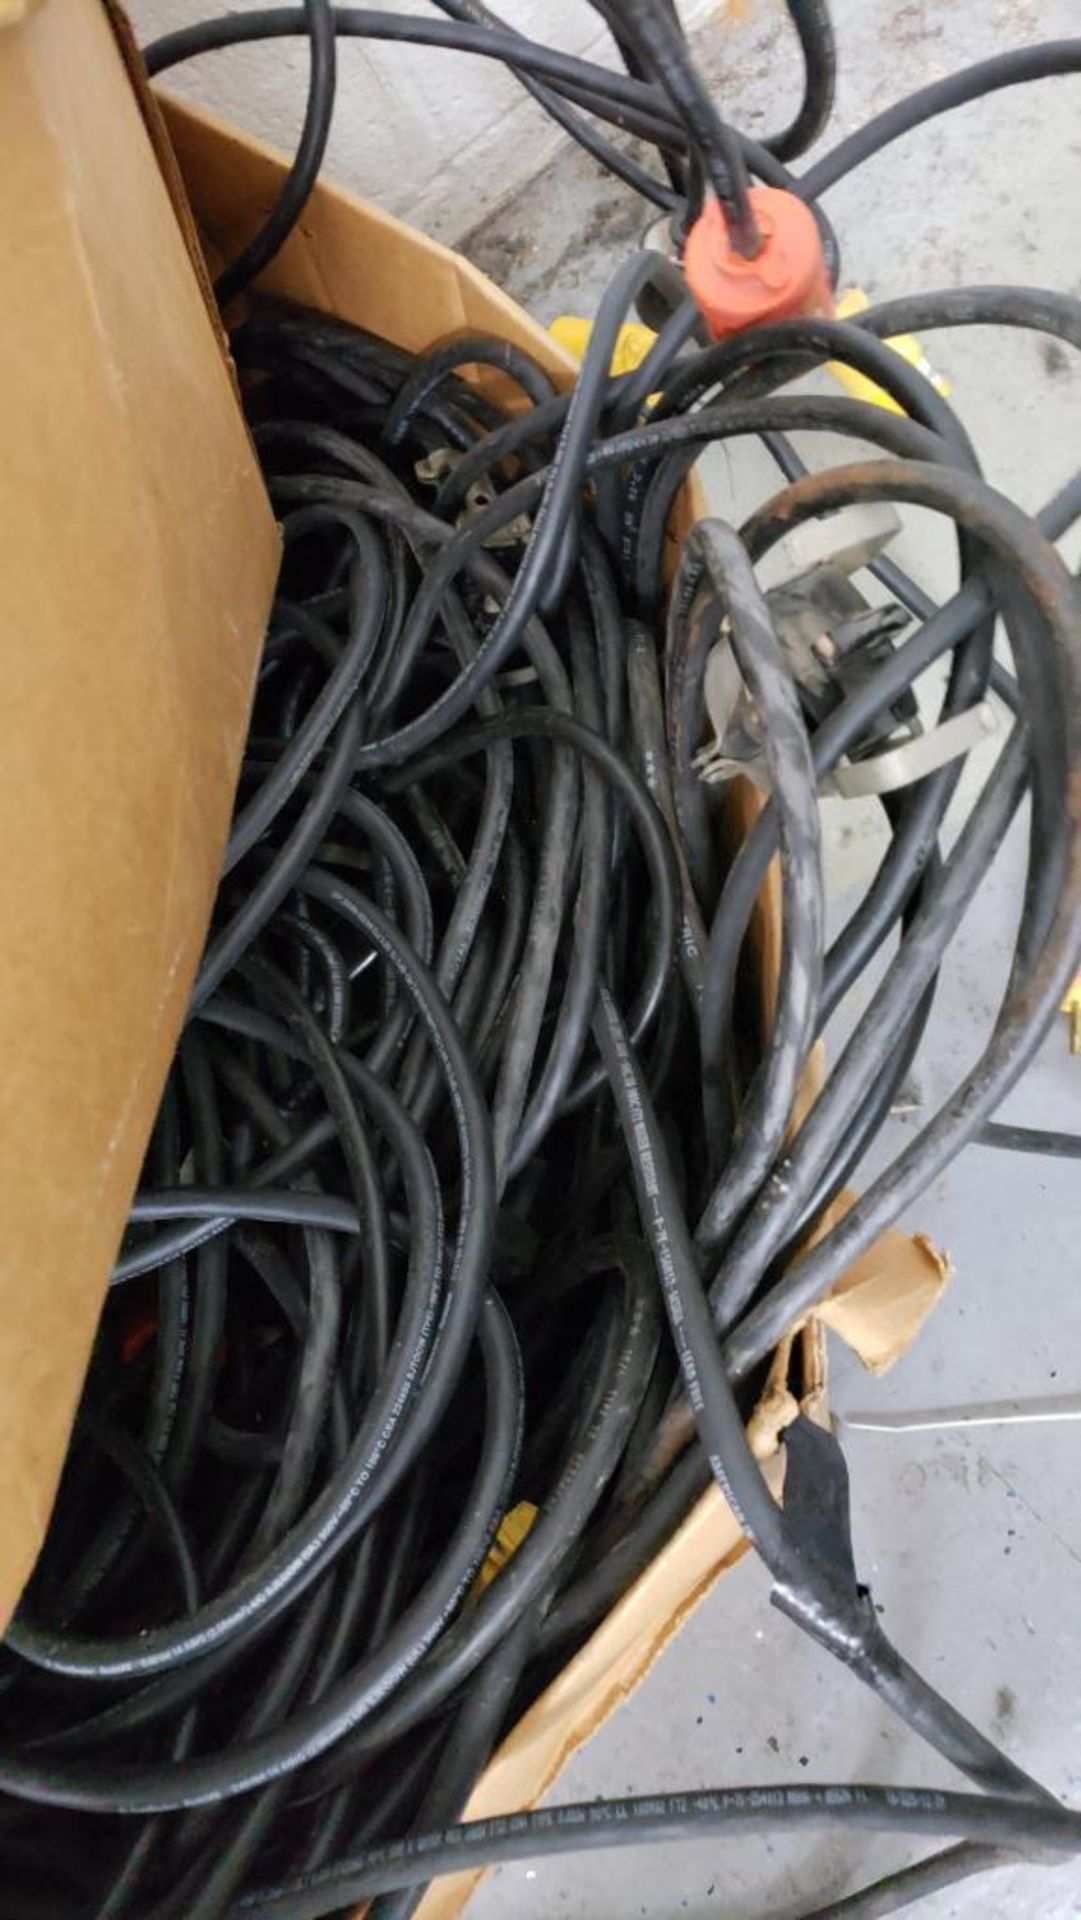 Qty 3 - boxes of assorted electrical cords. - Image 4 of 5